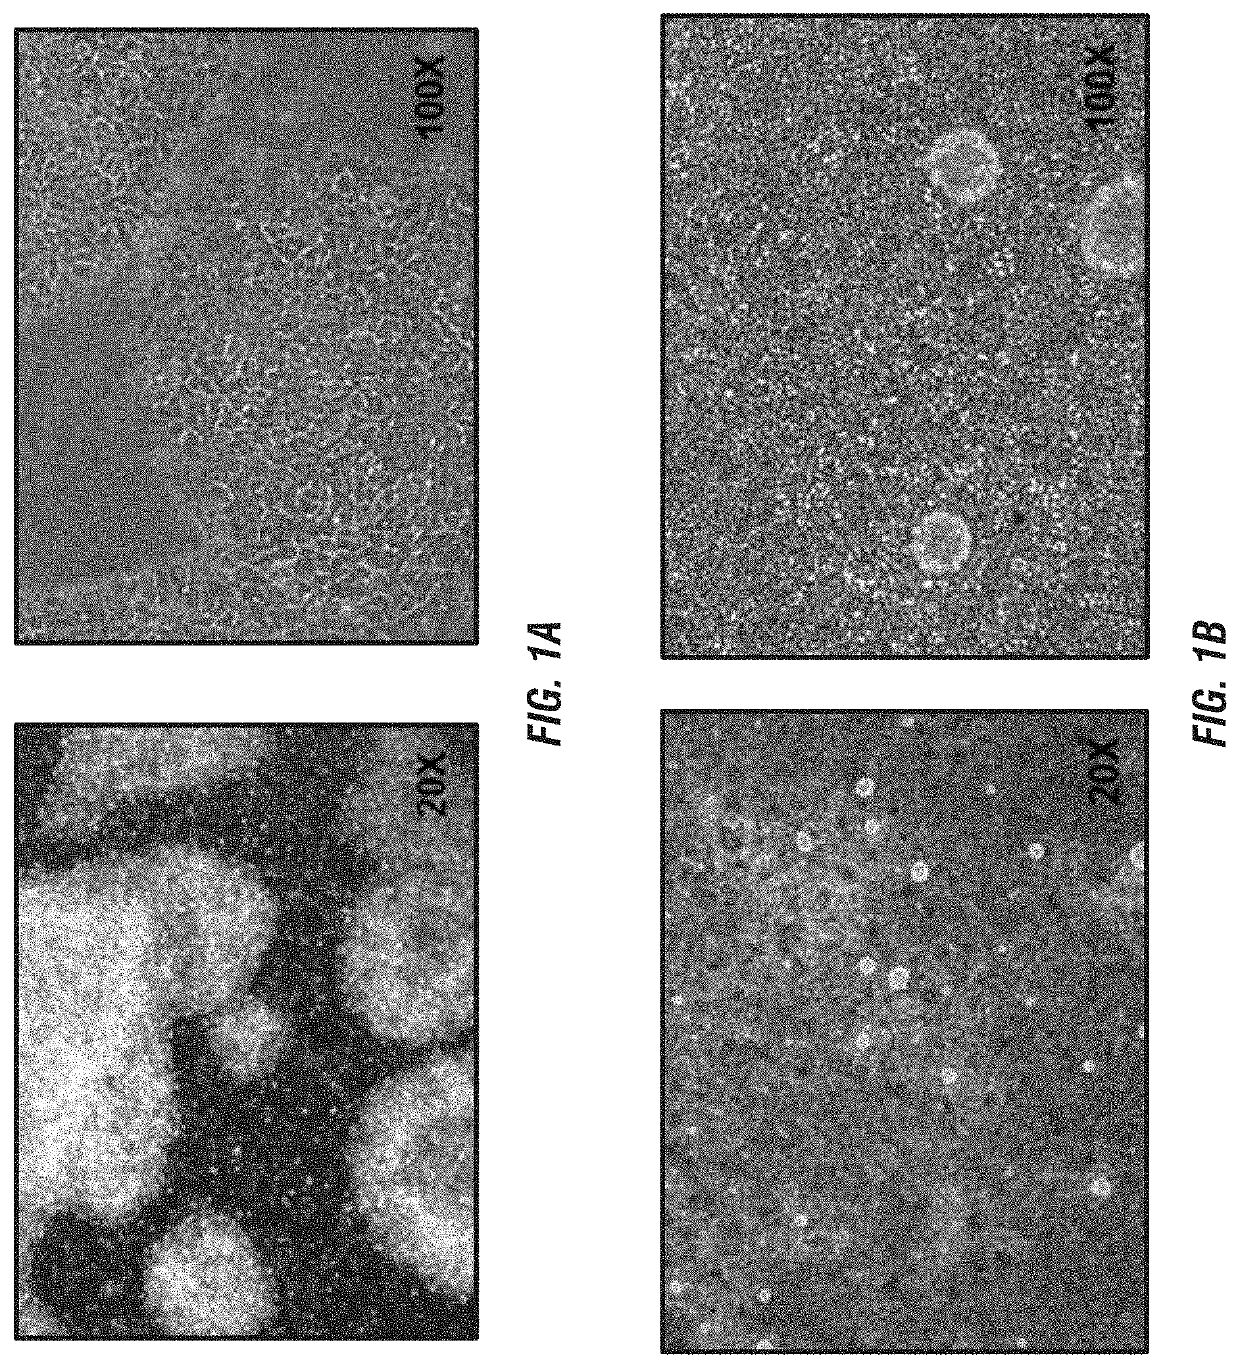 Macs-based purification of stem cell-derived retinal pigment epithelium